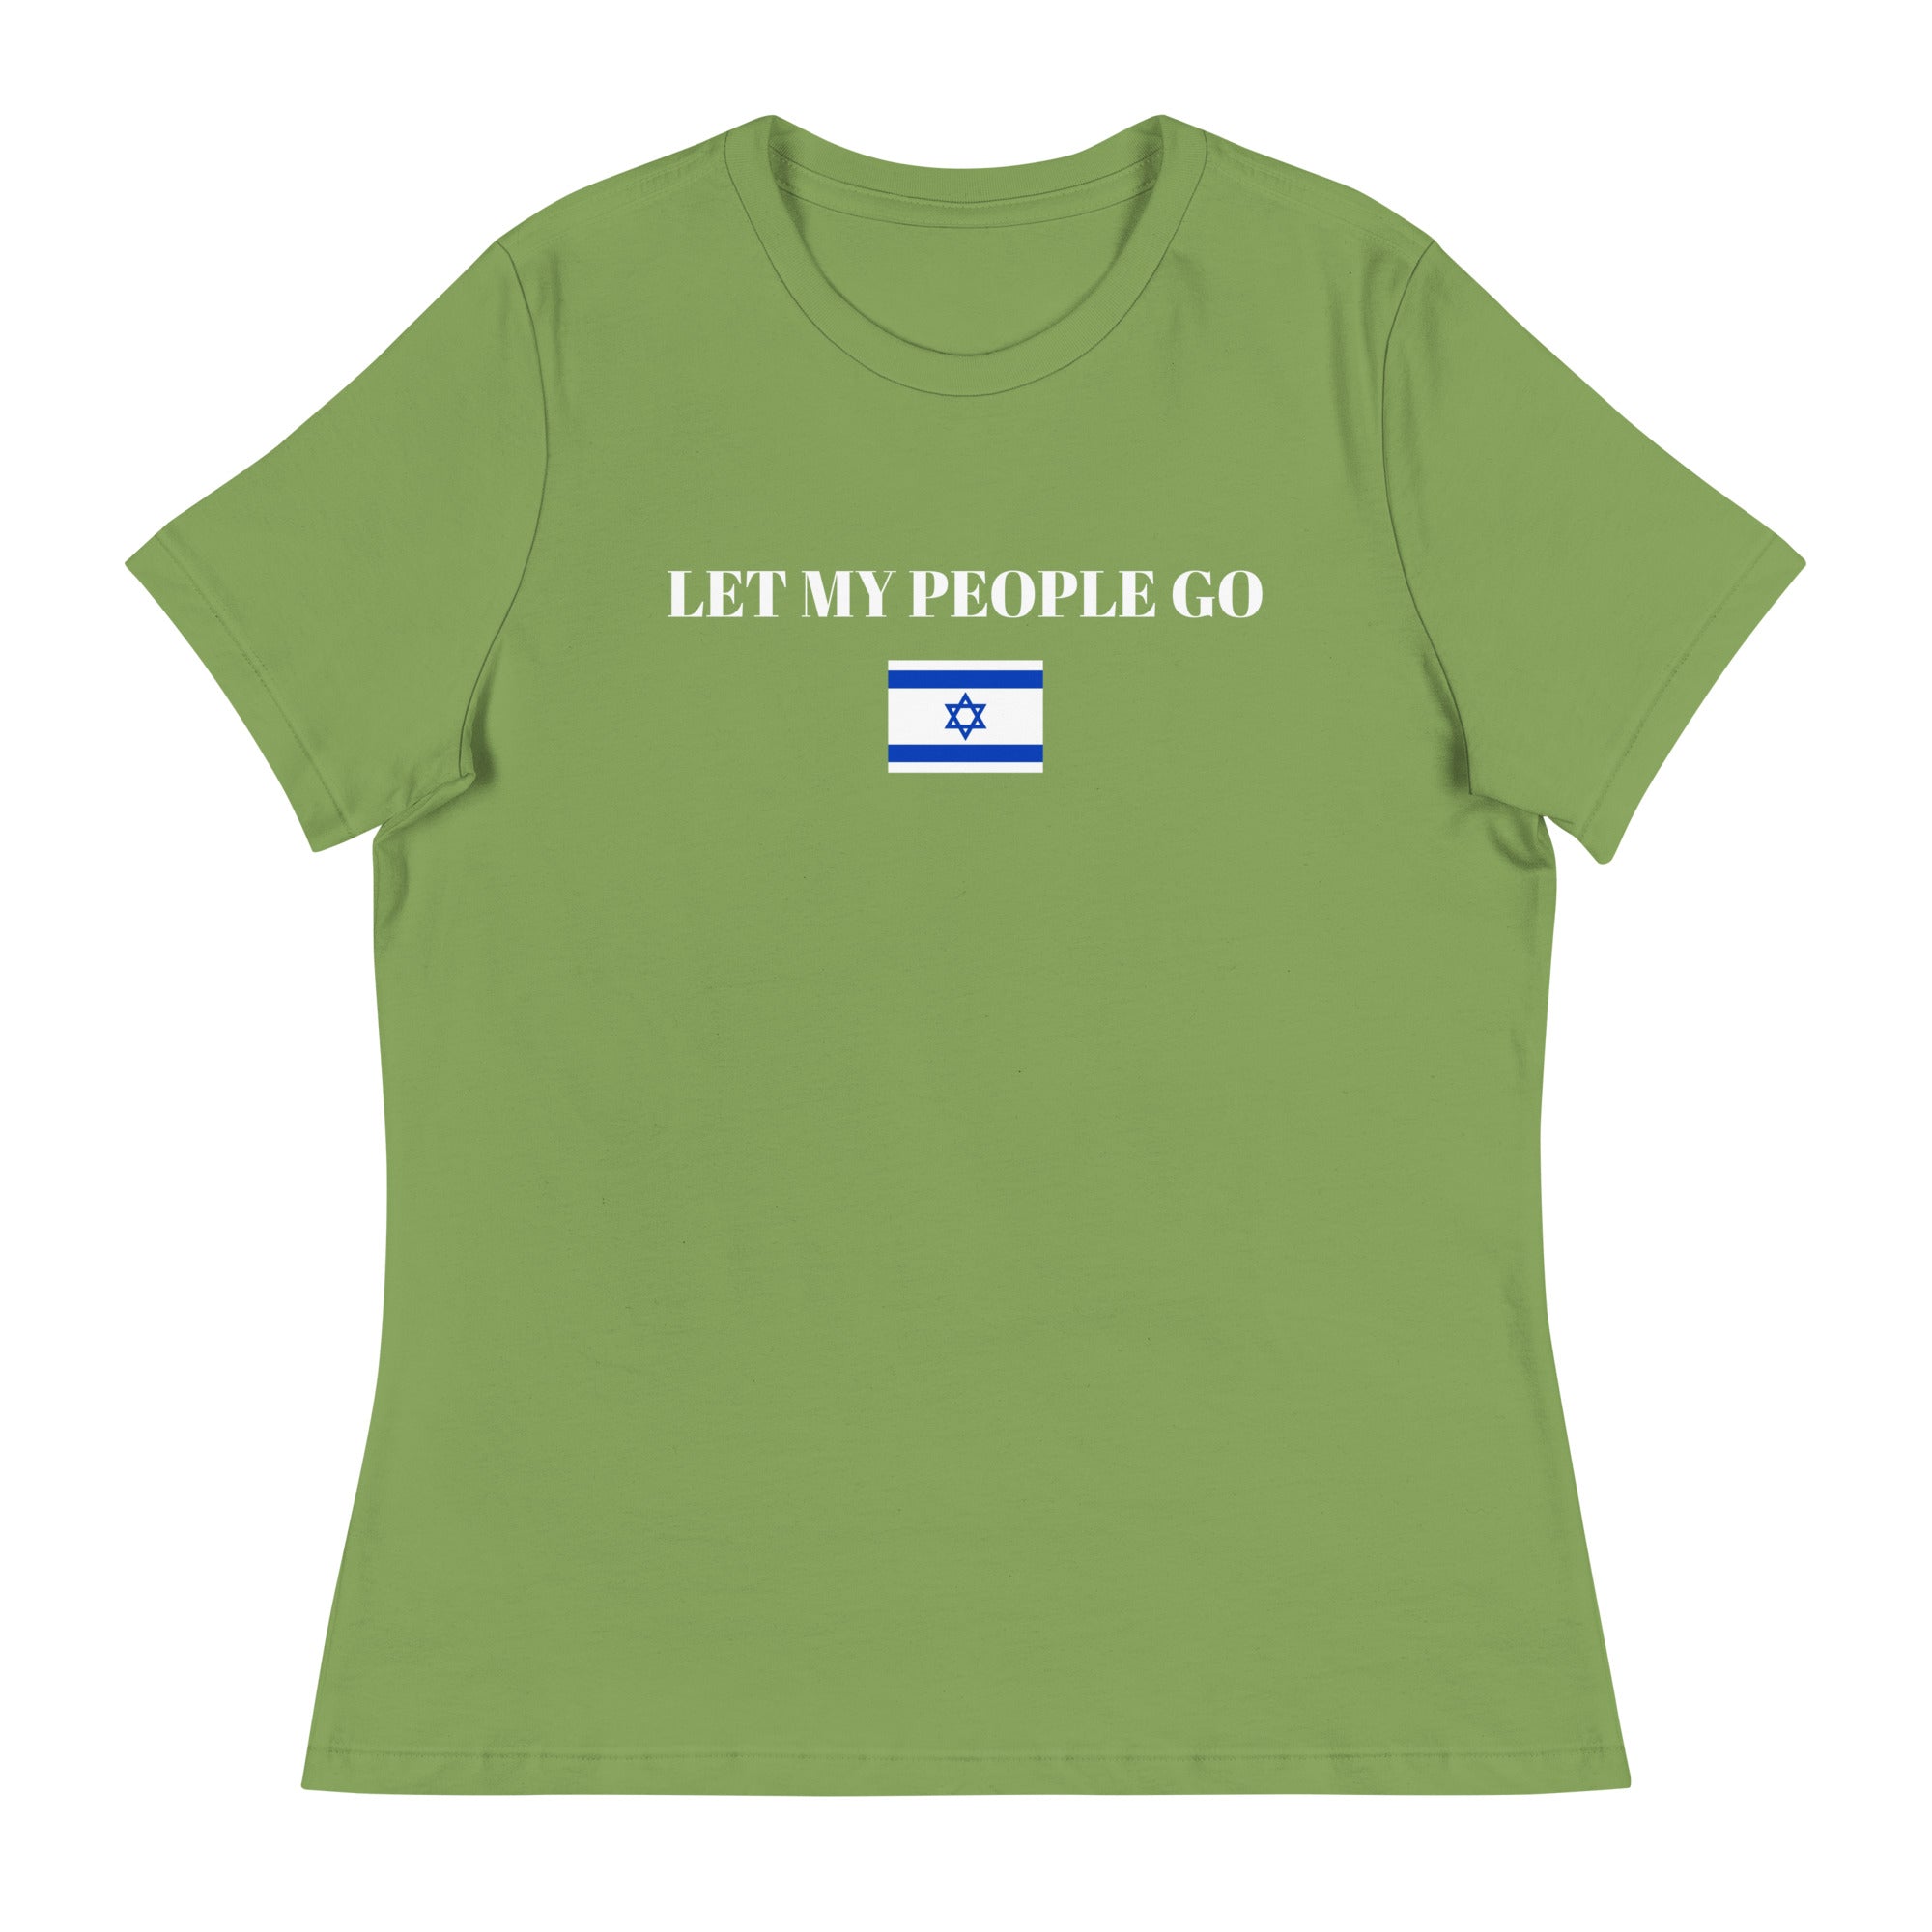 Let My People Go - Women's Relaxed T-Shirt